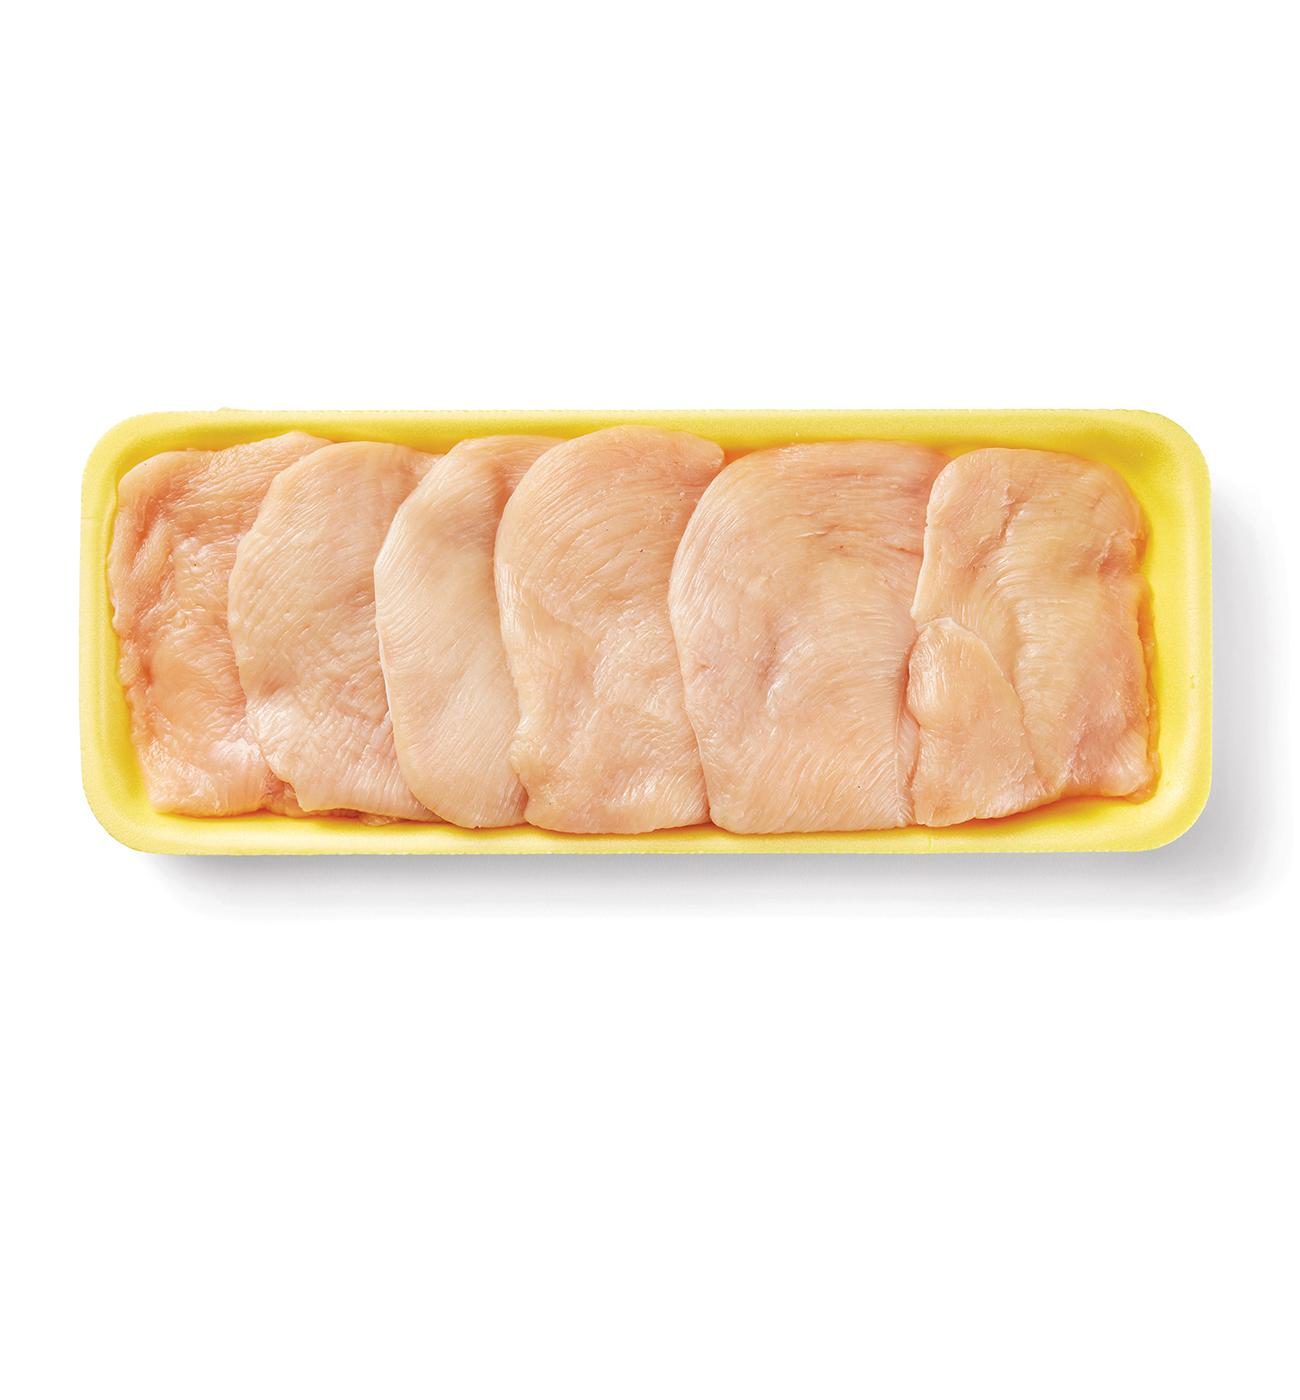 Hill Country Fare Boneless Skinless Thin Sliced Chicken Breast; image 3 of 4